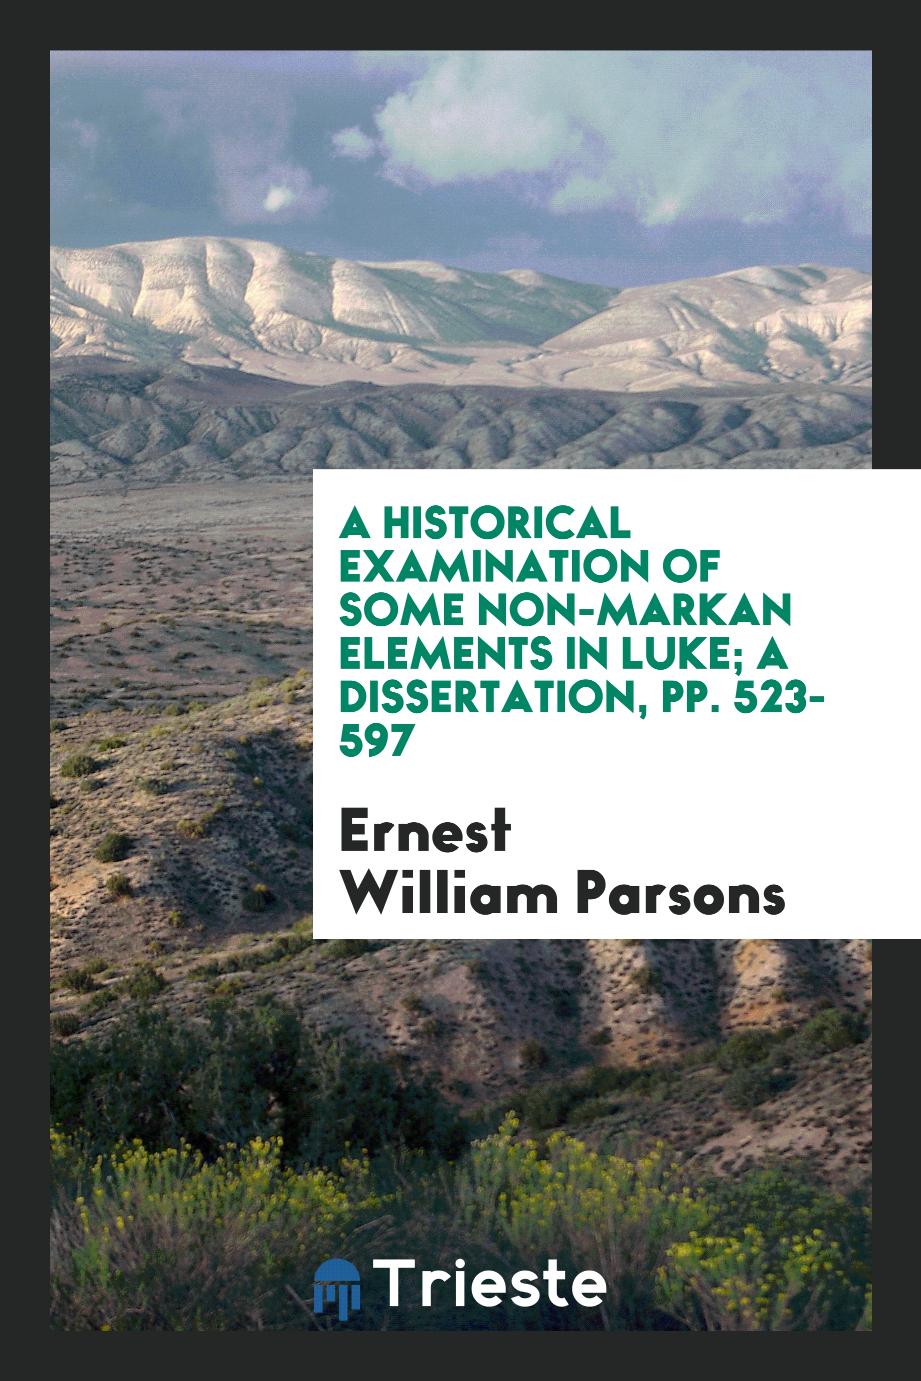 A Historical Examination of Some Non-Markan Elements in Luke; A Dissertation, pp. 523-597